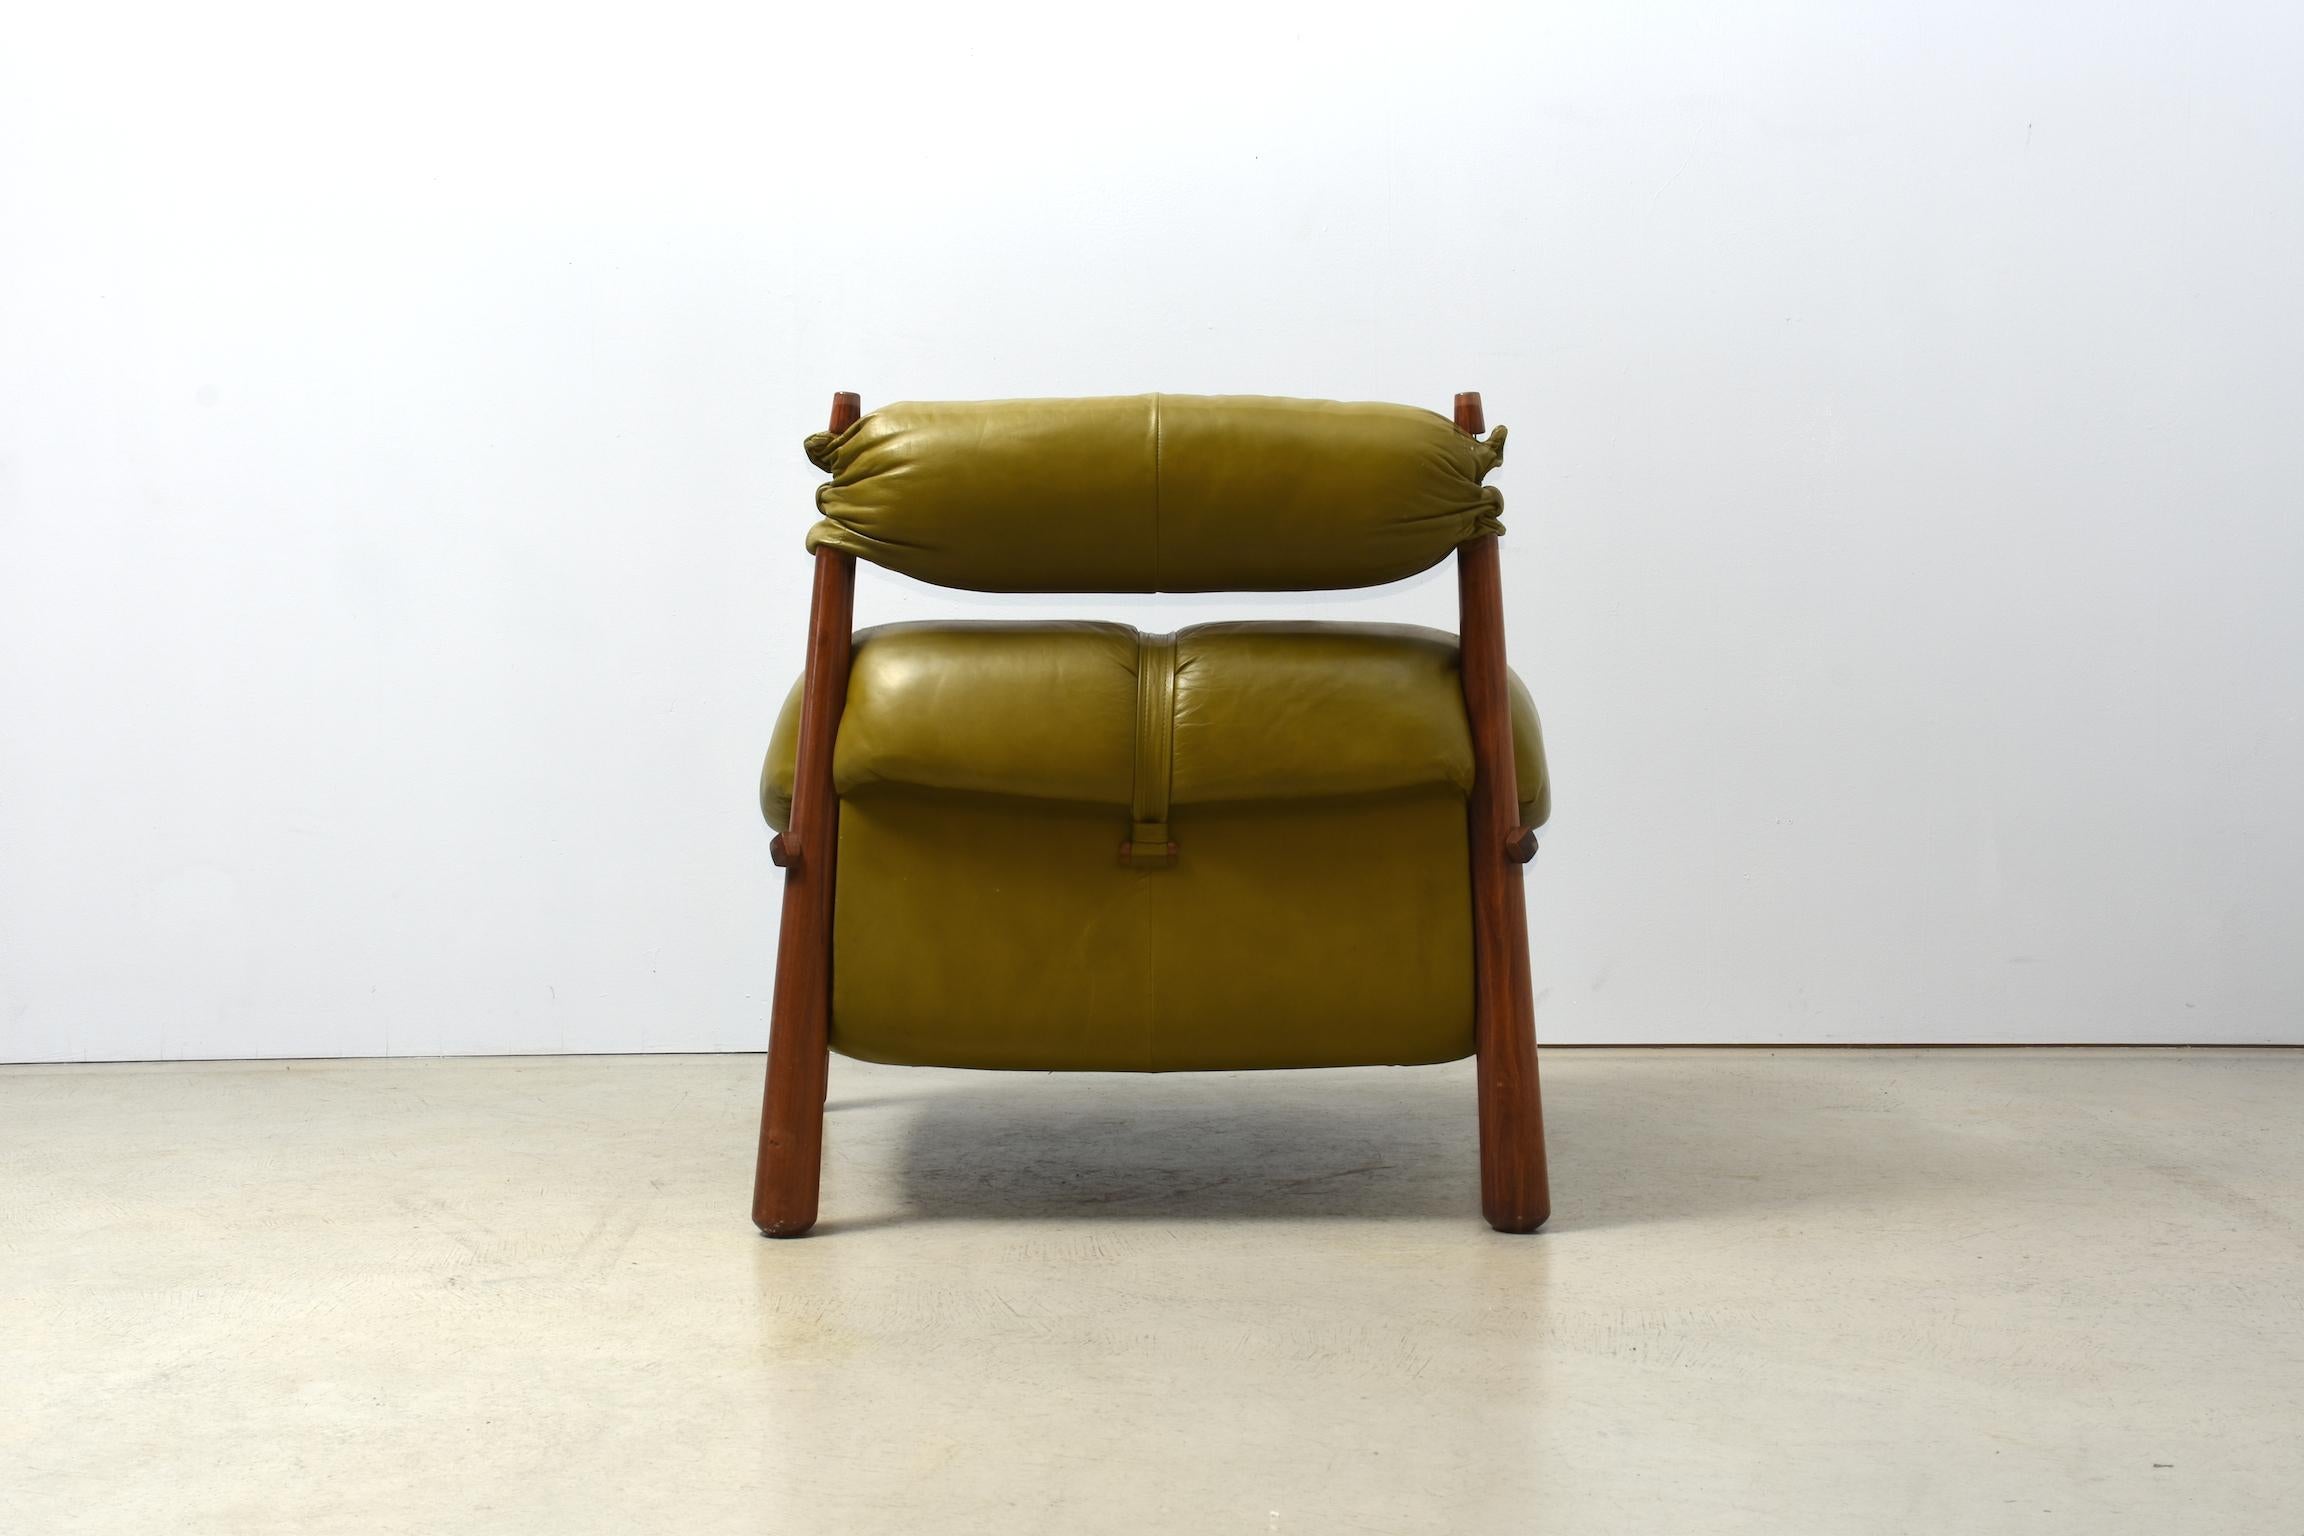 Percival Lafer Brazilian Lounge Chair Late 1950s Jacaranda Leather Olivegreen In Good Condition For Sale In Zürich, Zürich